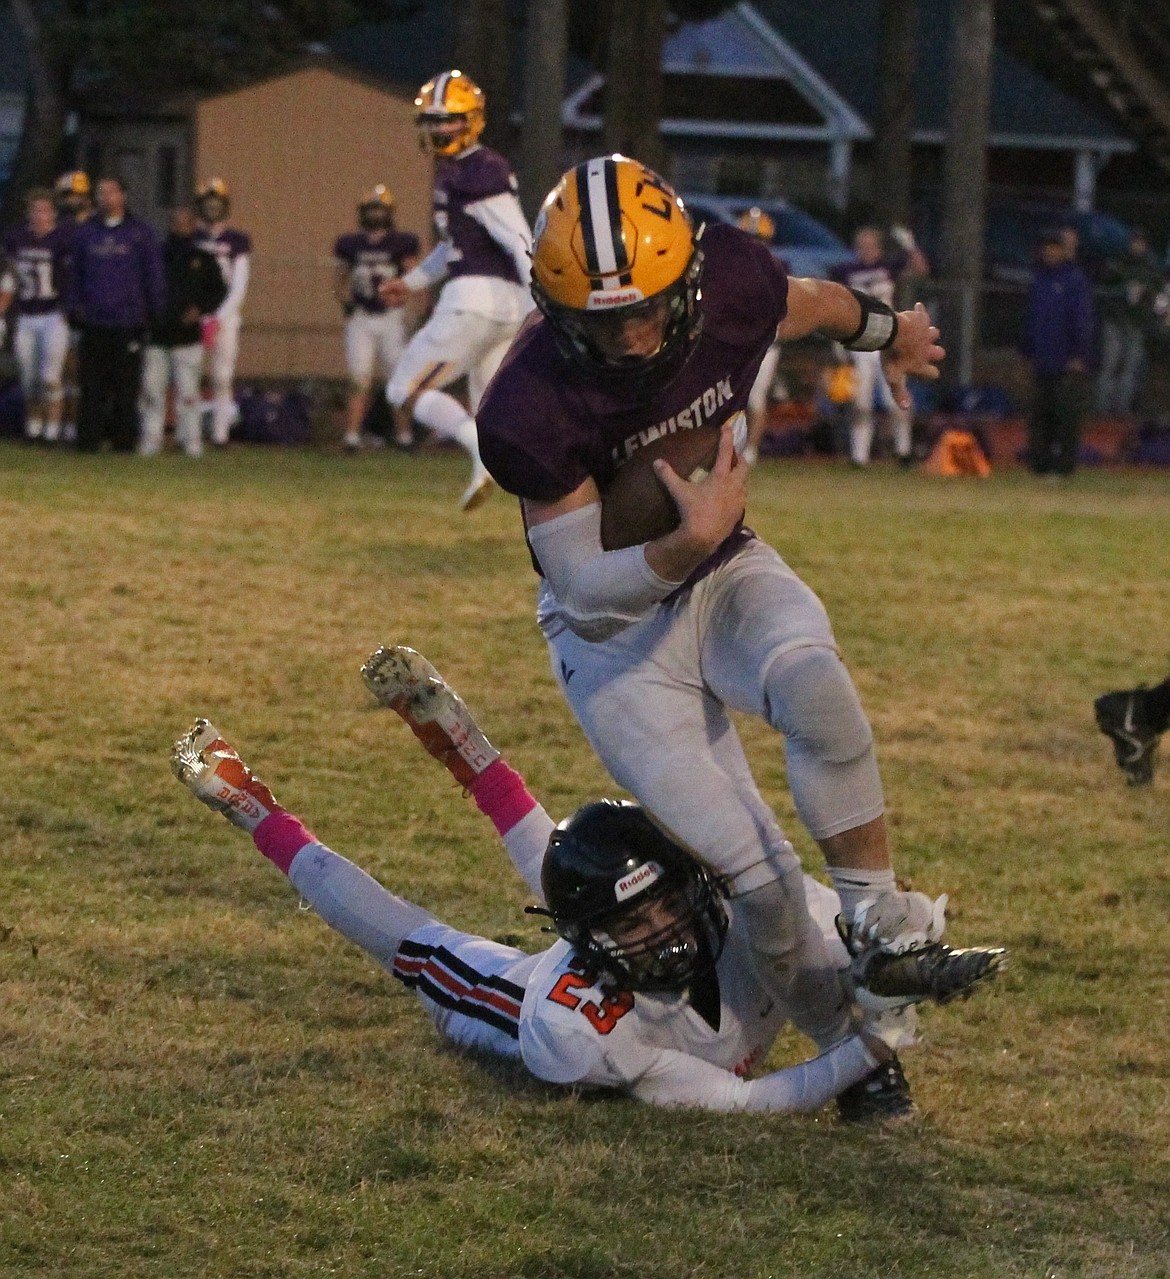 MARK NELKE/Press
Jack Sciortino (23) of Post Falls trips up Lewiston quarterback Jace McKarcher during a 5A Inland Empire League modified Kansas tiebreaker Monday night at Bear Field in Moscow.